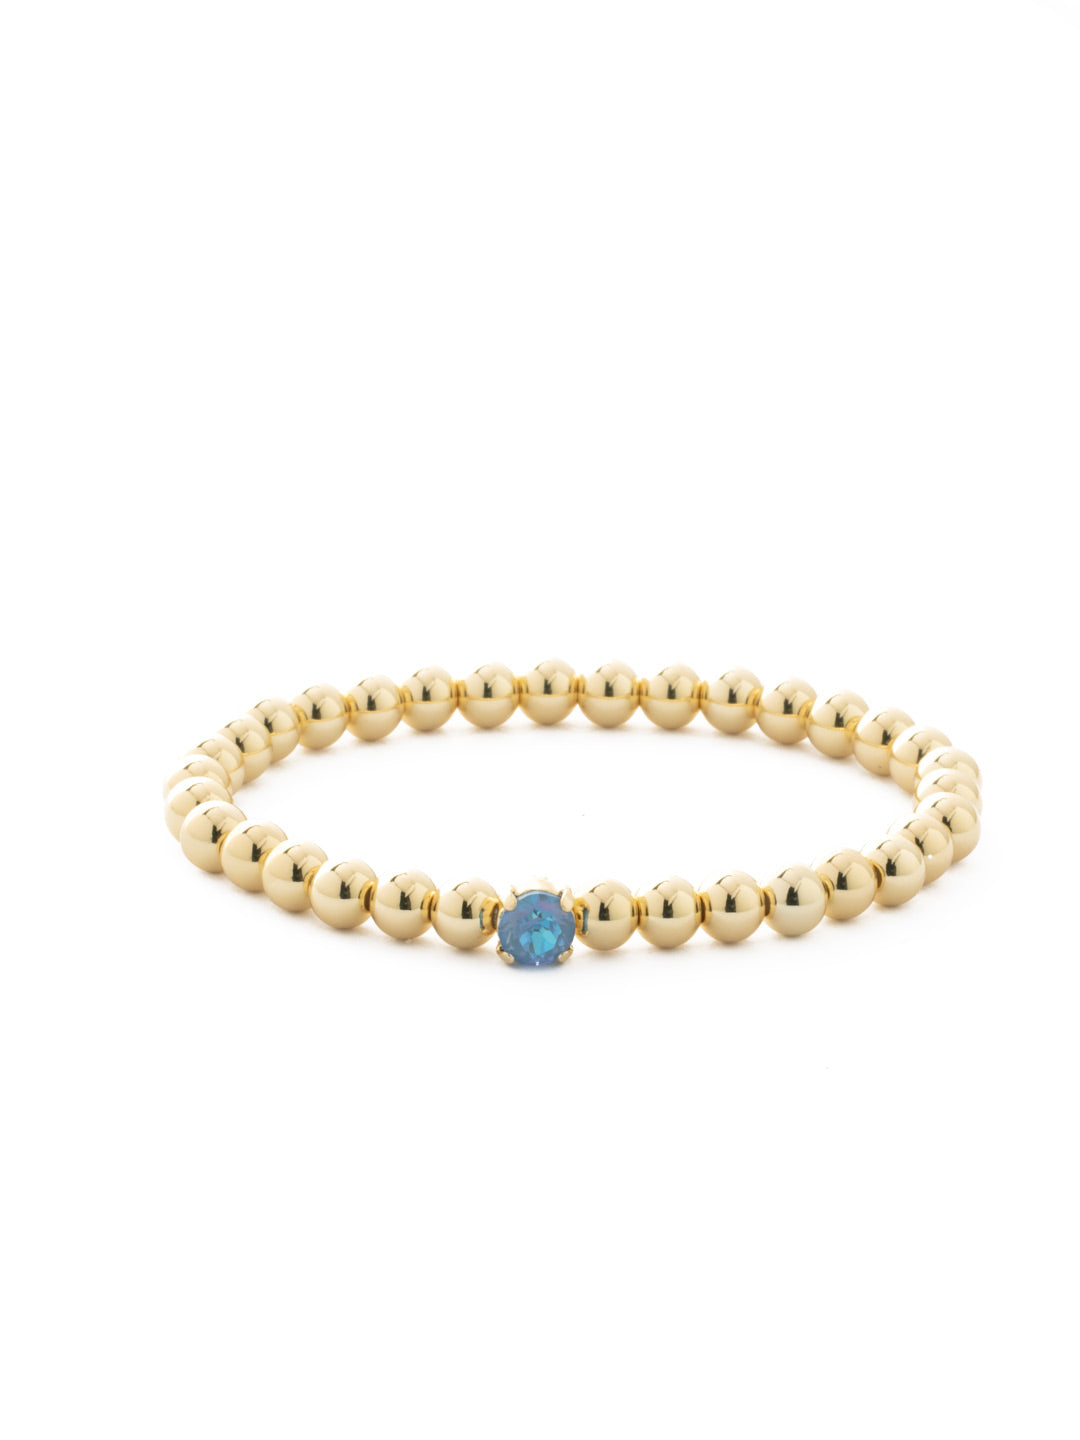 Mini Single Crystal Stretch Bracelet - BFN33BGOCD - <p>The Mini Single Crystal Stretch Bracelet features repeating metal beads and a single round cut crystal on a multi-layered stretchy jewelry filament, creating a durable and trendy piece. From Sorrelli's Ocean Delite collection in our Bright Gold-tone finish.</p>